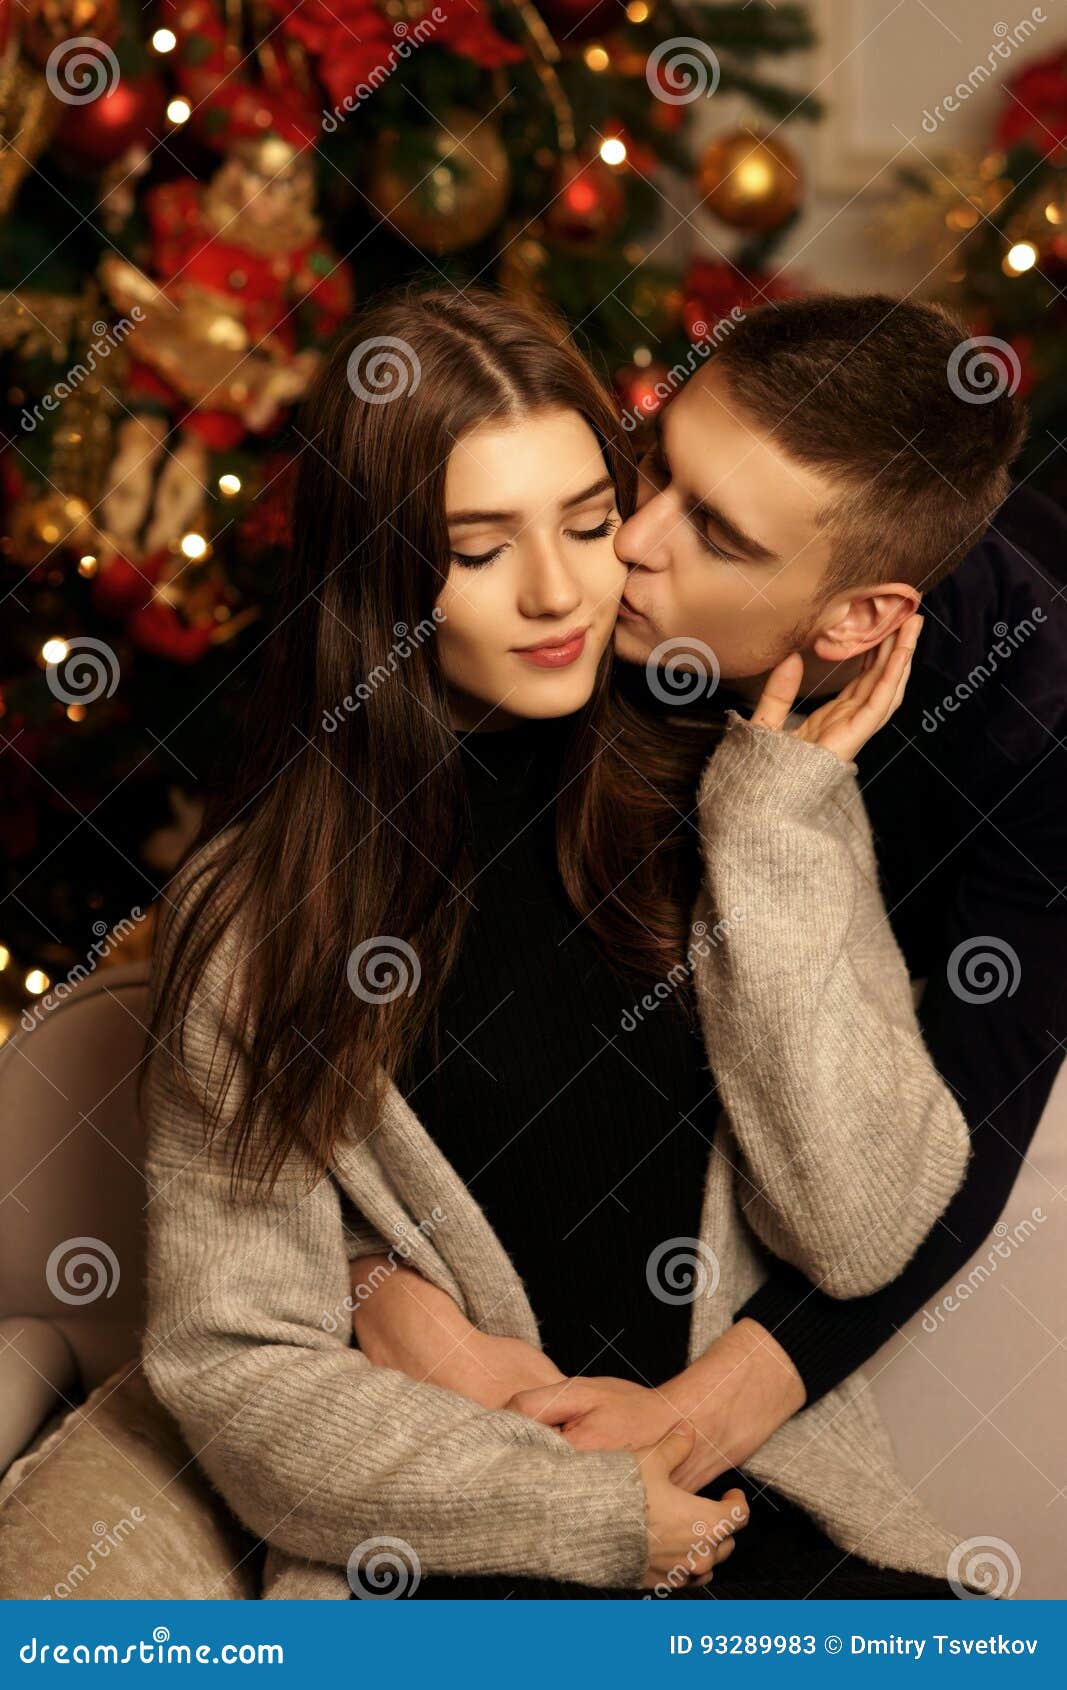 Romantic Couple Hugging in Christmas Interior Stock Image - Image ...